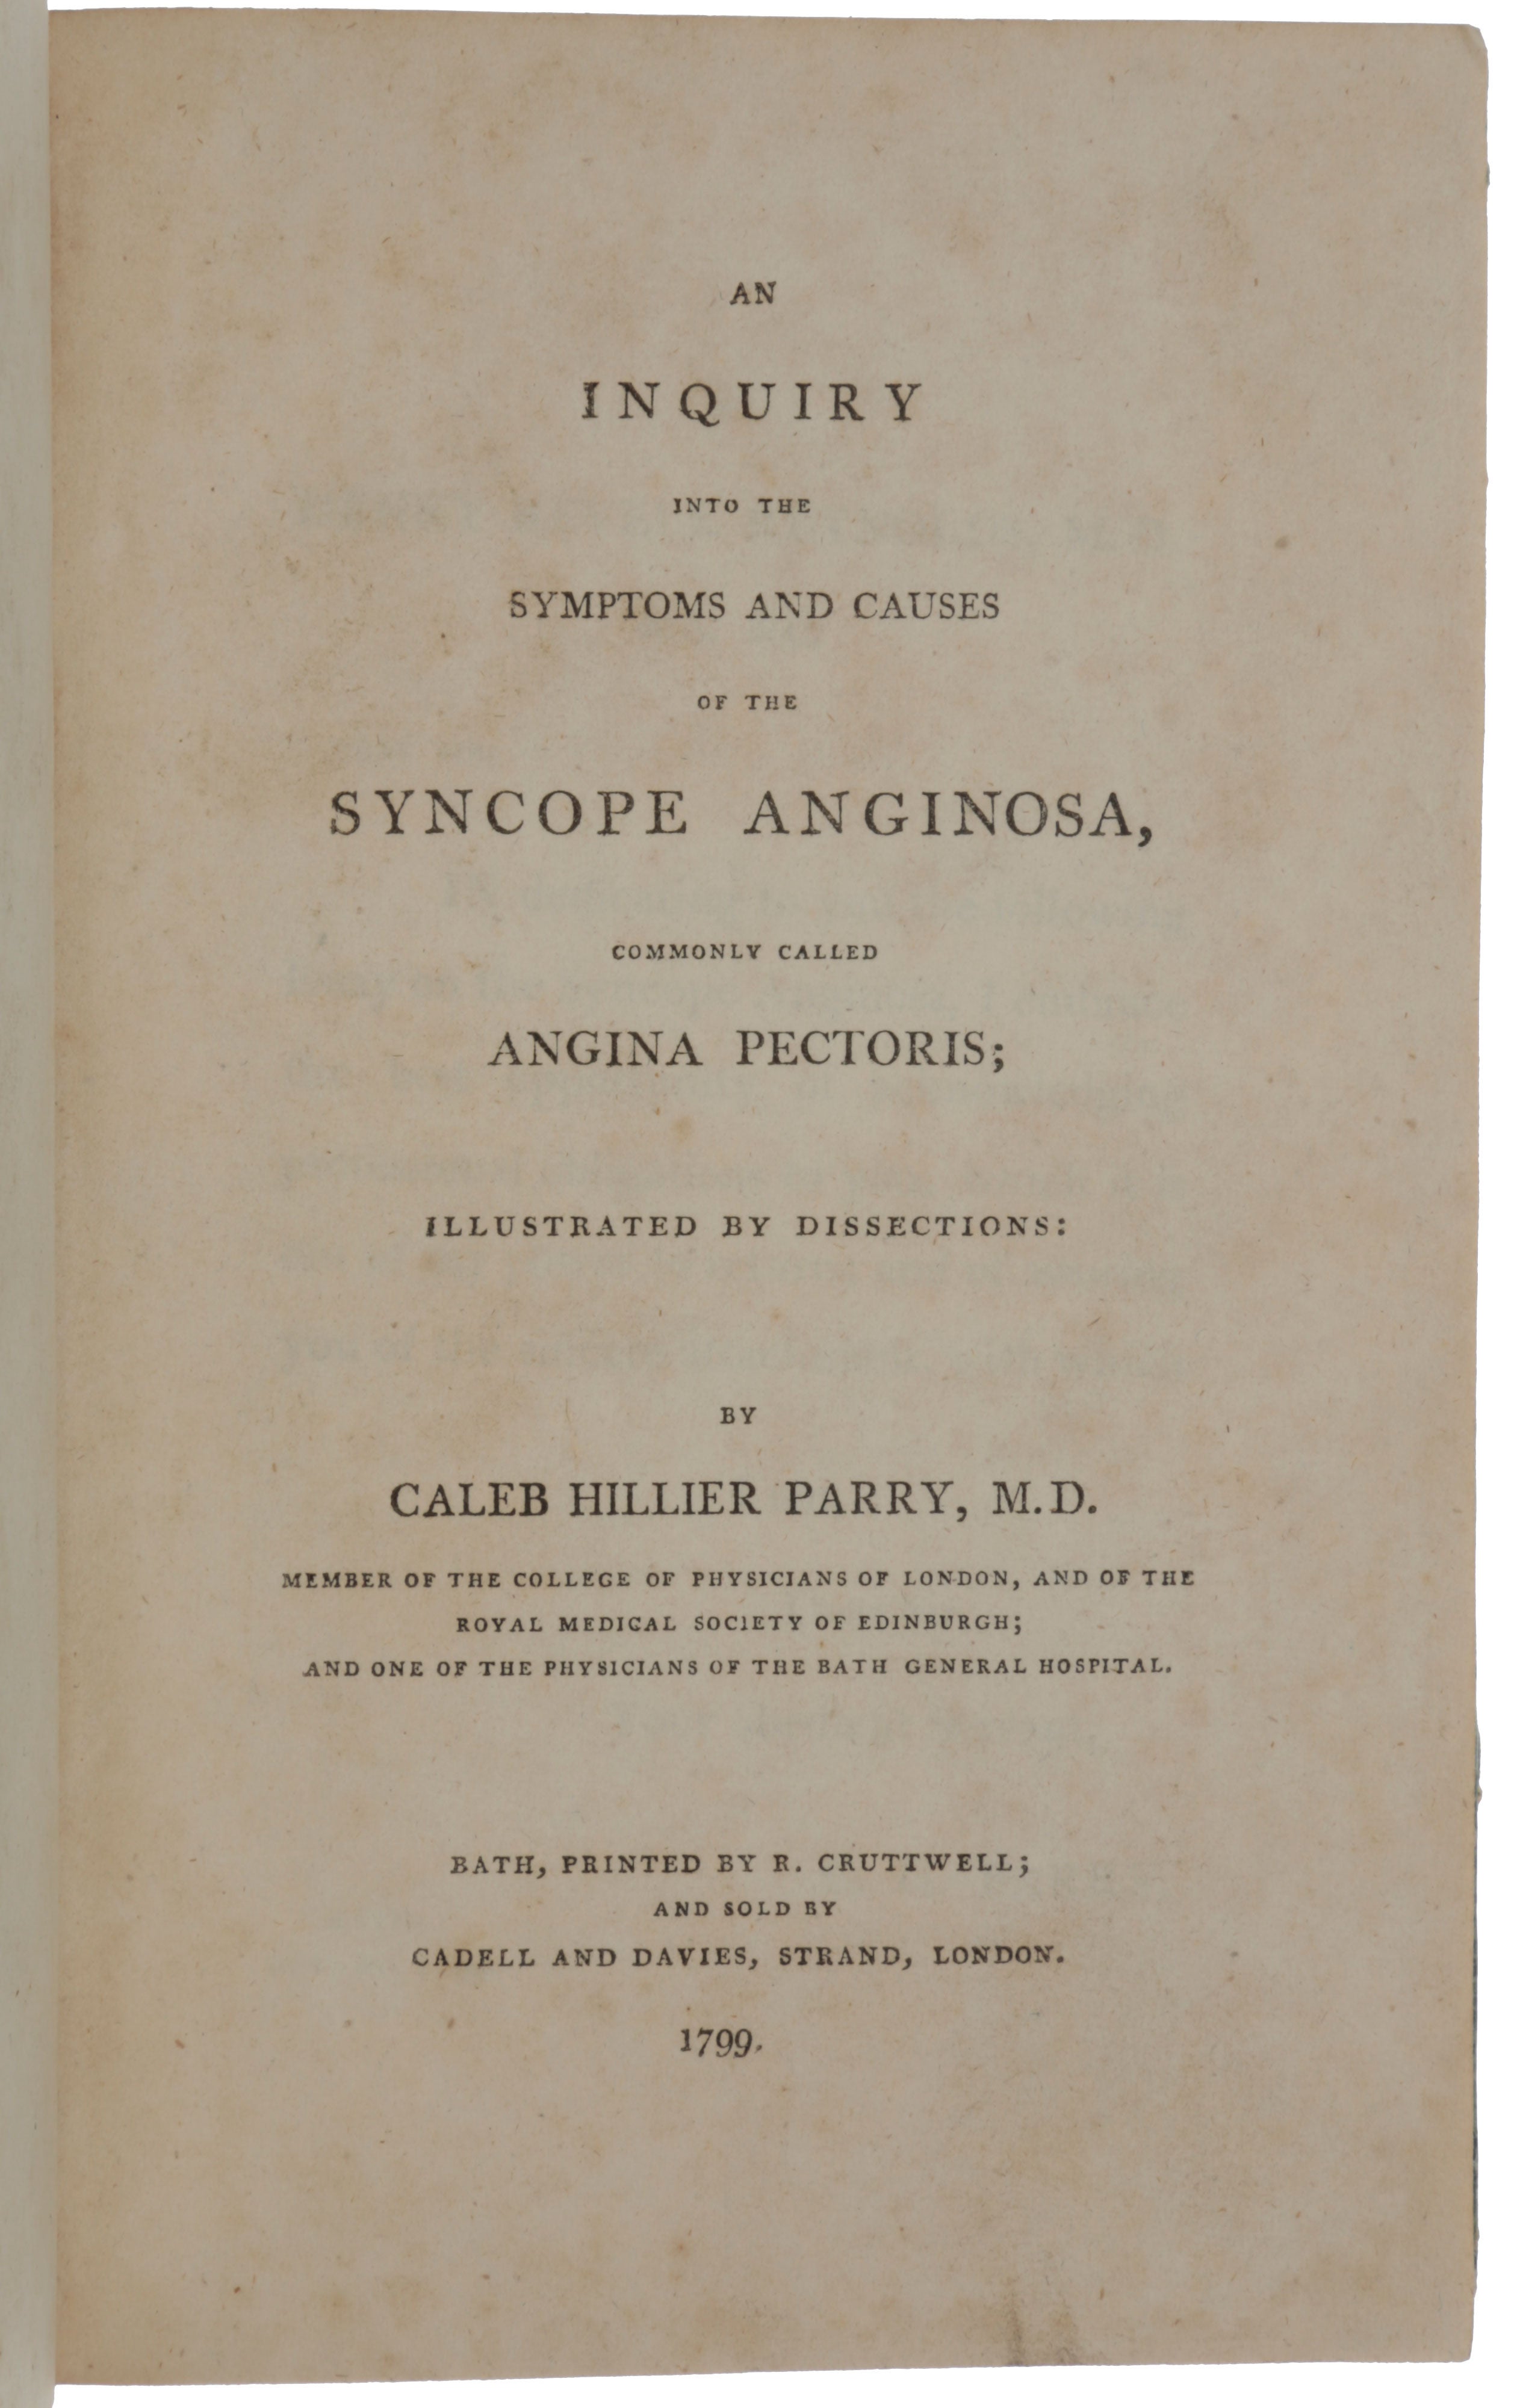 Item #5028 An Inquiry into the Symptoms and Causes of the Syncope Anginosa, commonly called Angina Pectoris. [Bound with:] BUTTER, William. A Treatise on the Disease commonly called Angina Pectoris. Caleb Hillier PARRY.